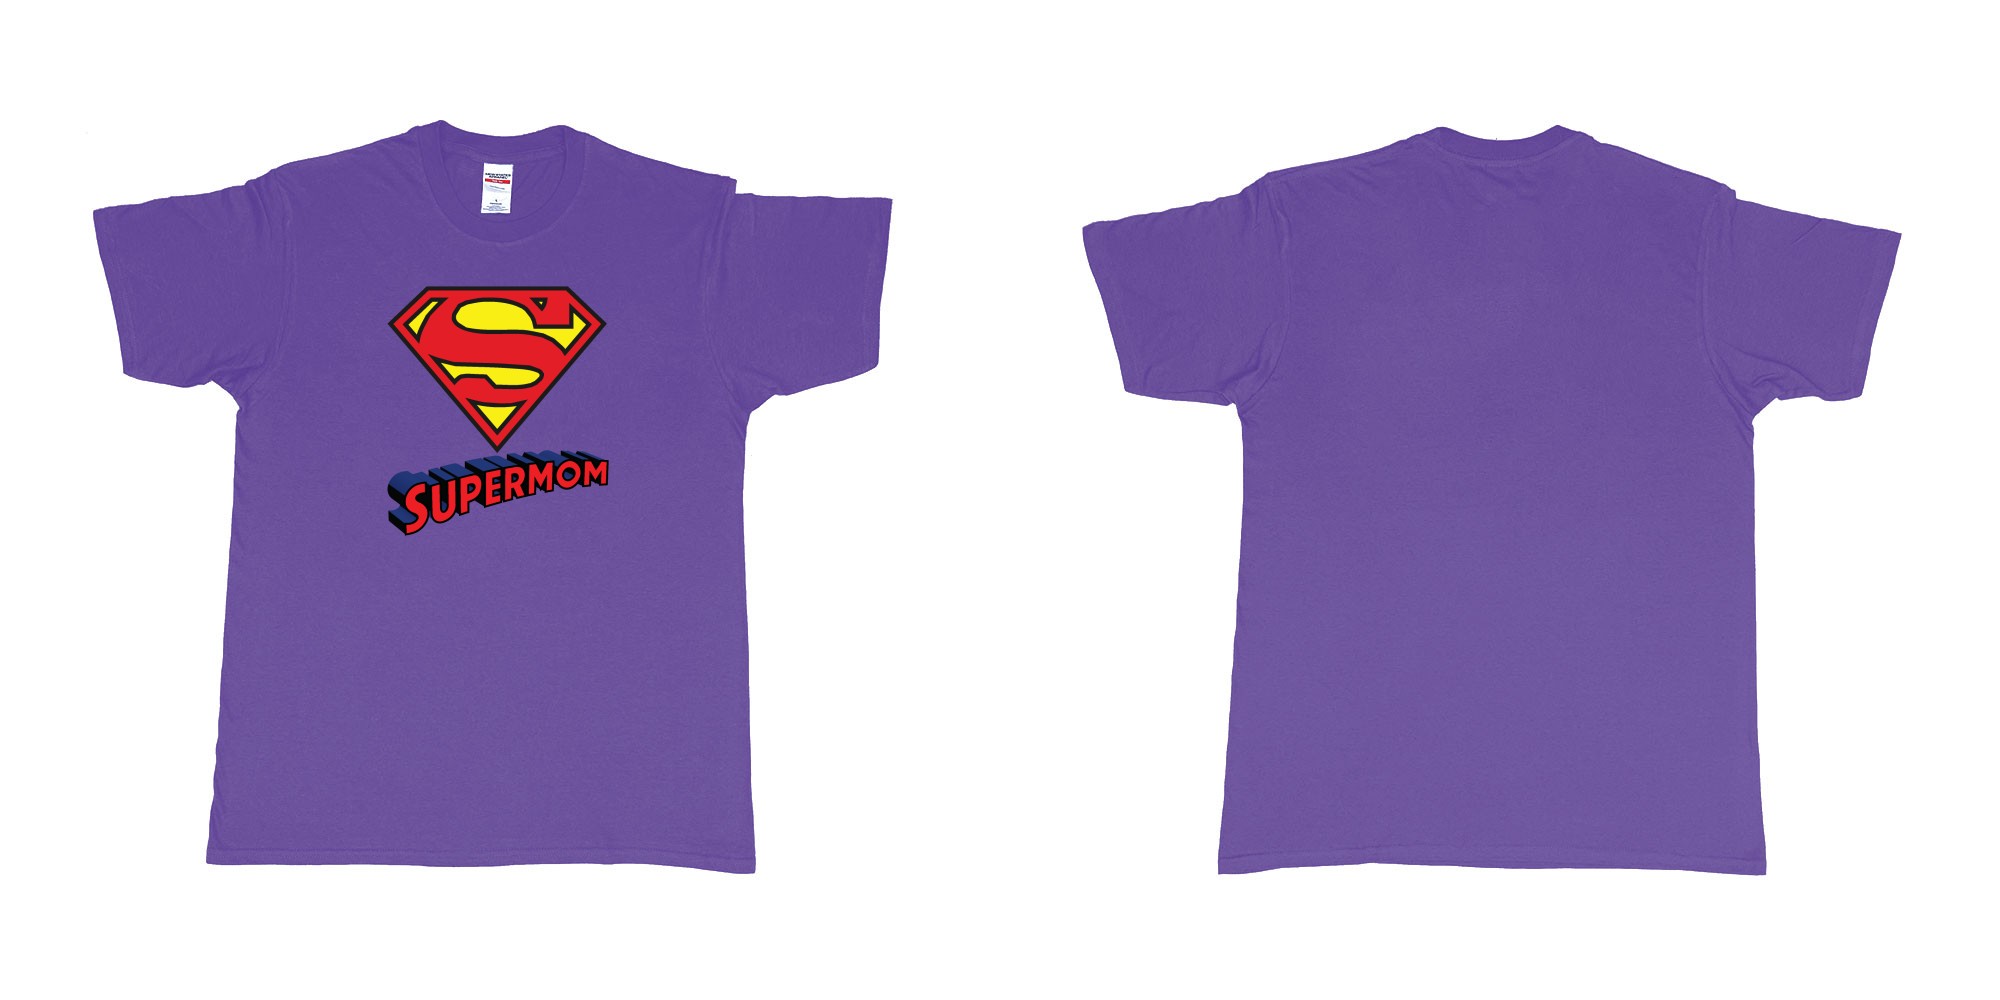 Custom tshirt design superman logo with own custom text print bali in fabric color purple choice your own text made in Bali by The Pirate Way